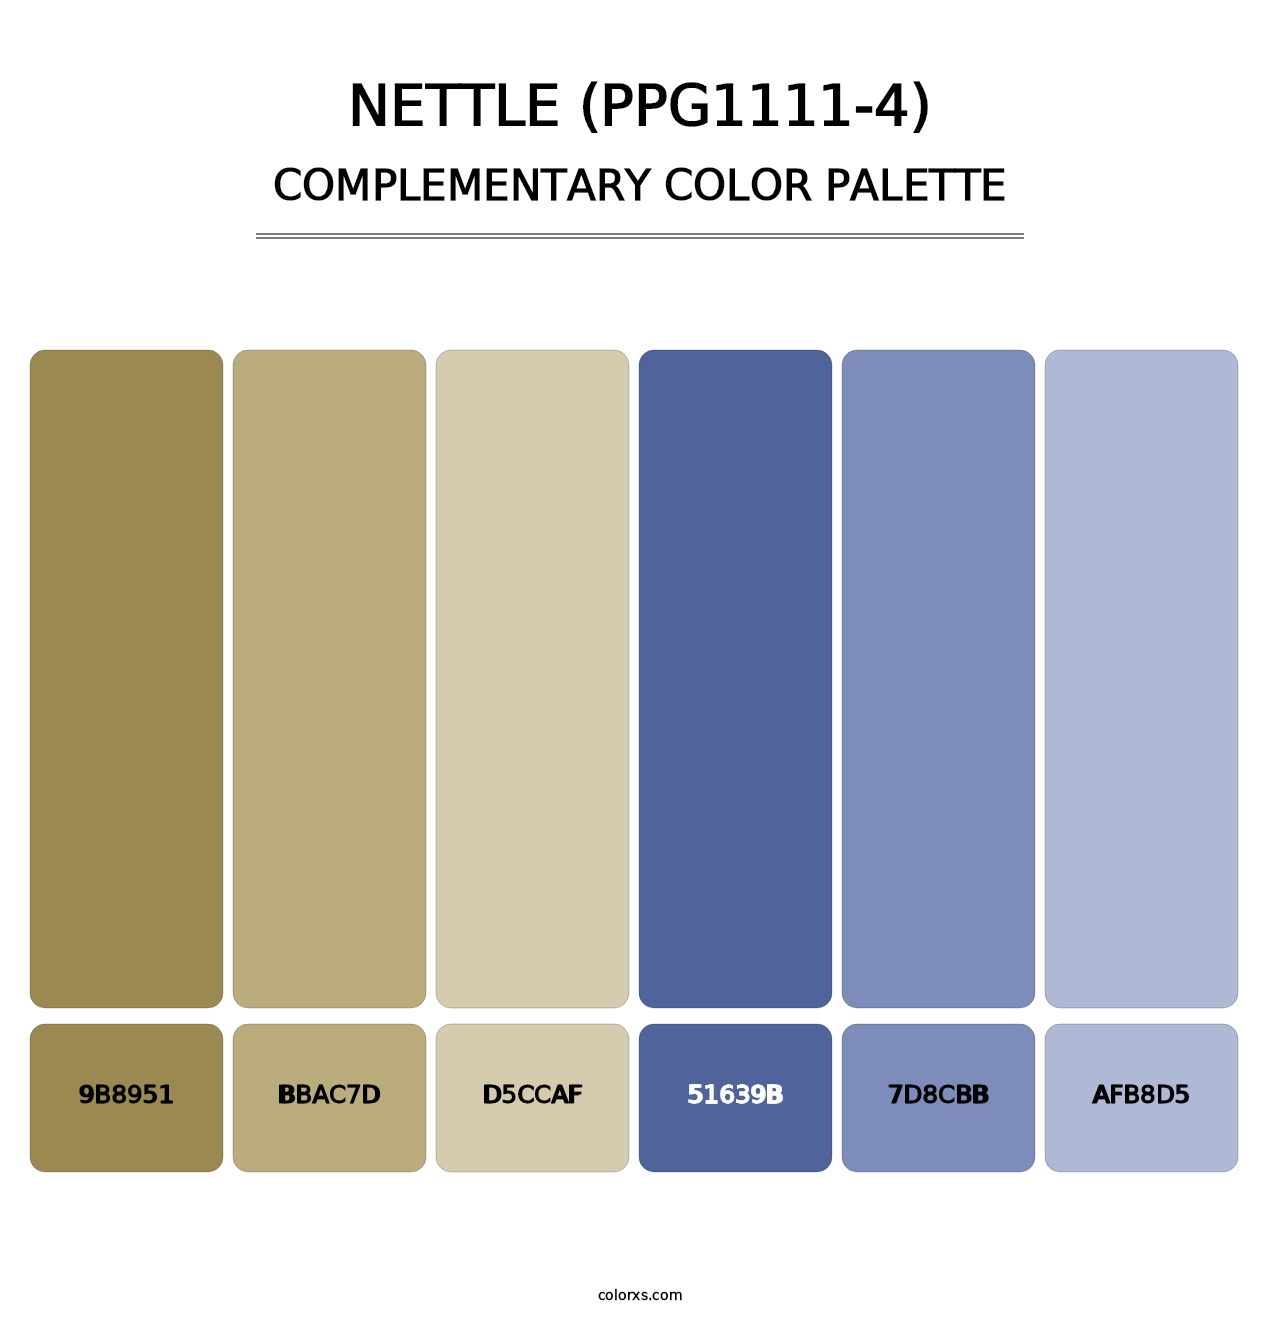 Nettle (PPG1111-4) - Complementary Color Palette